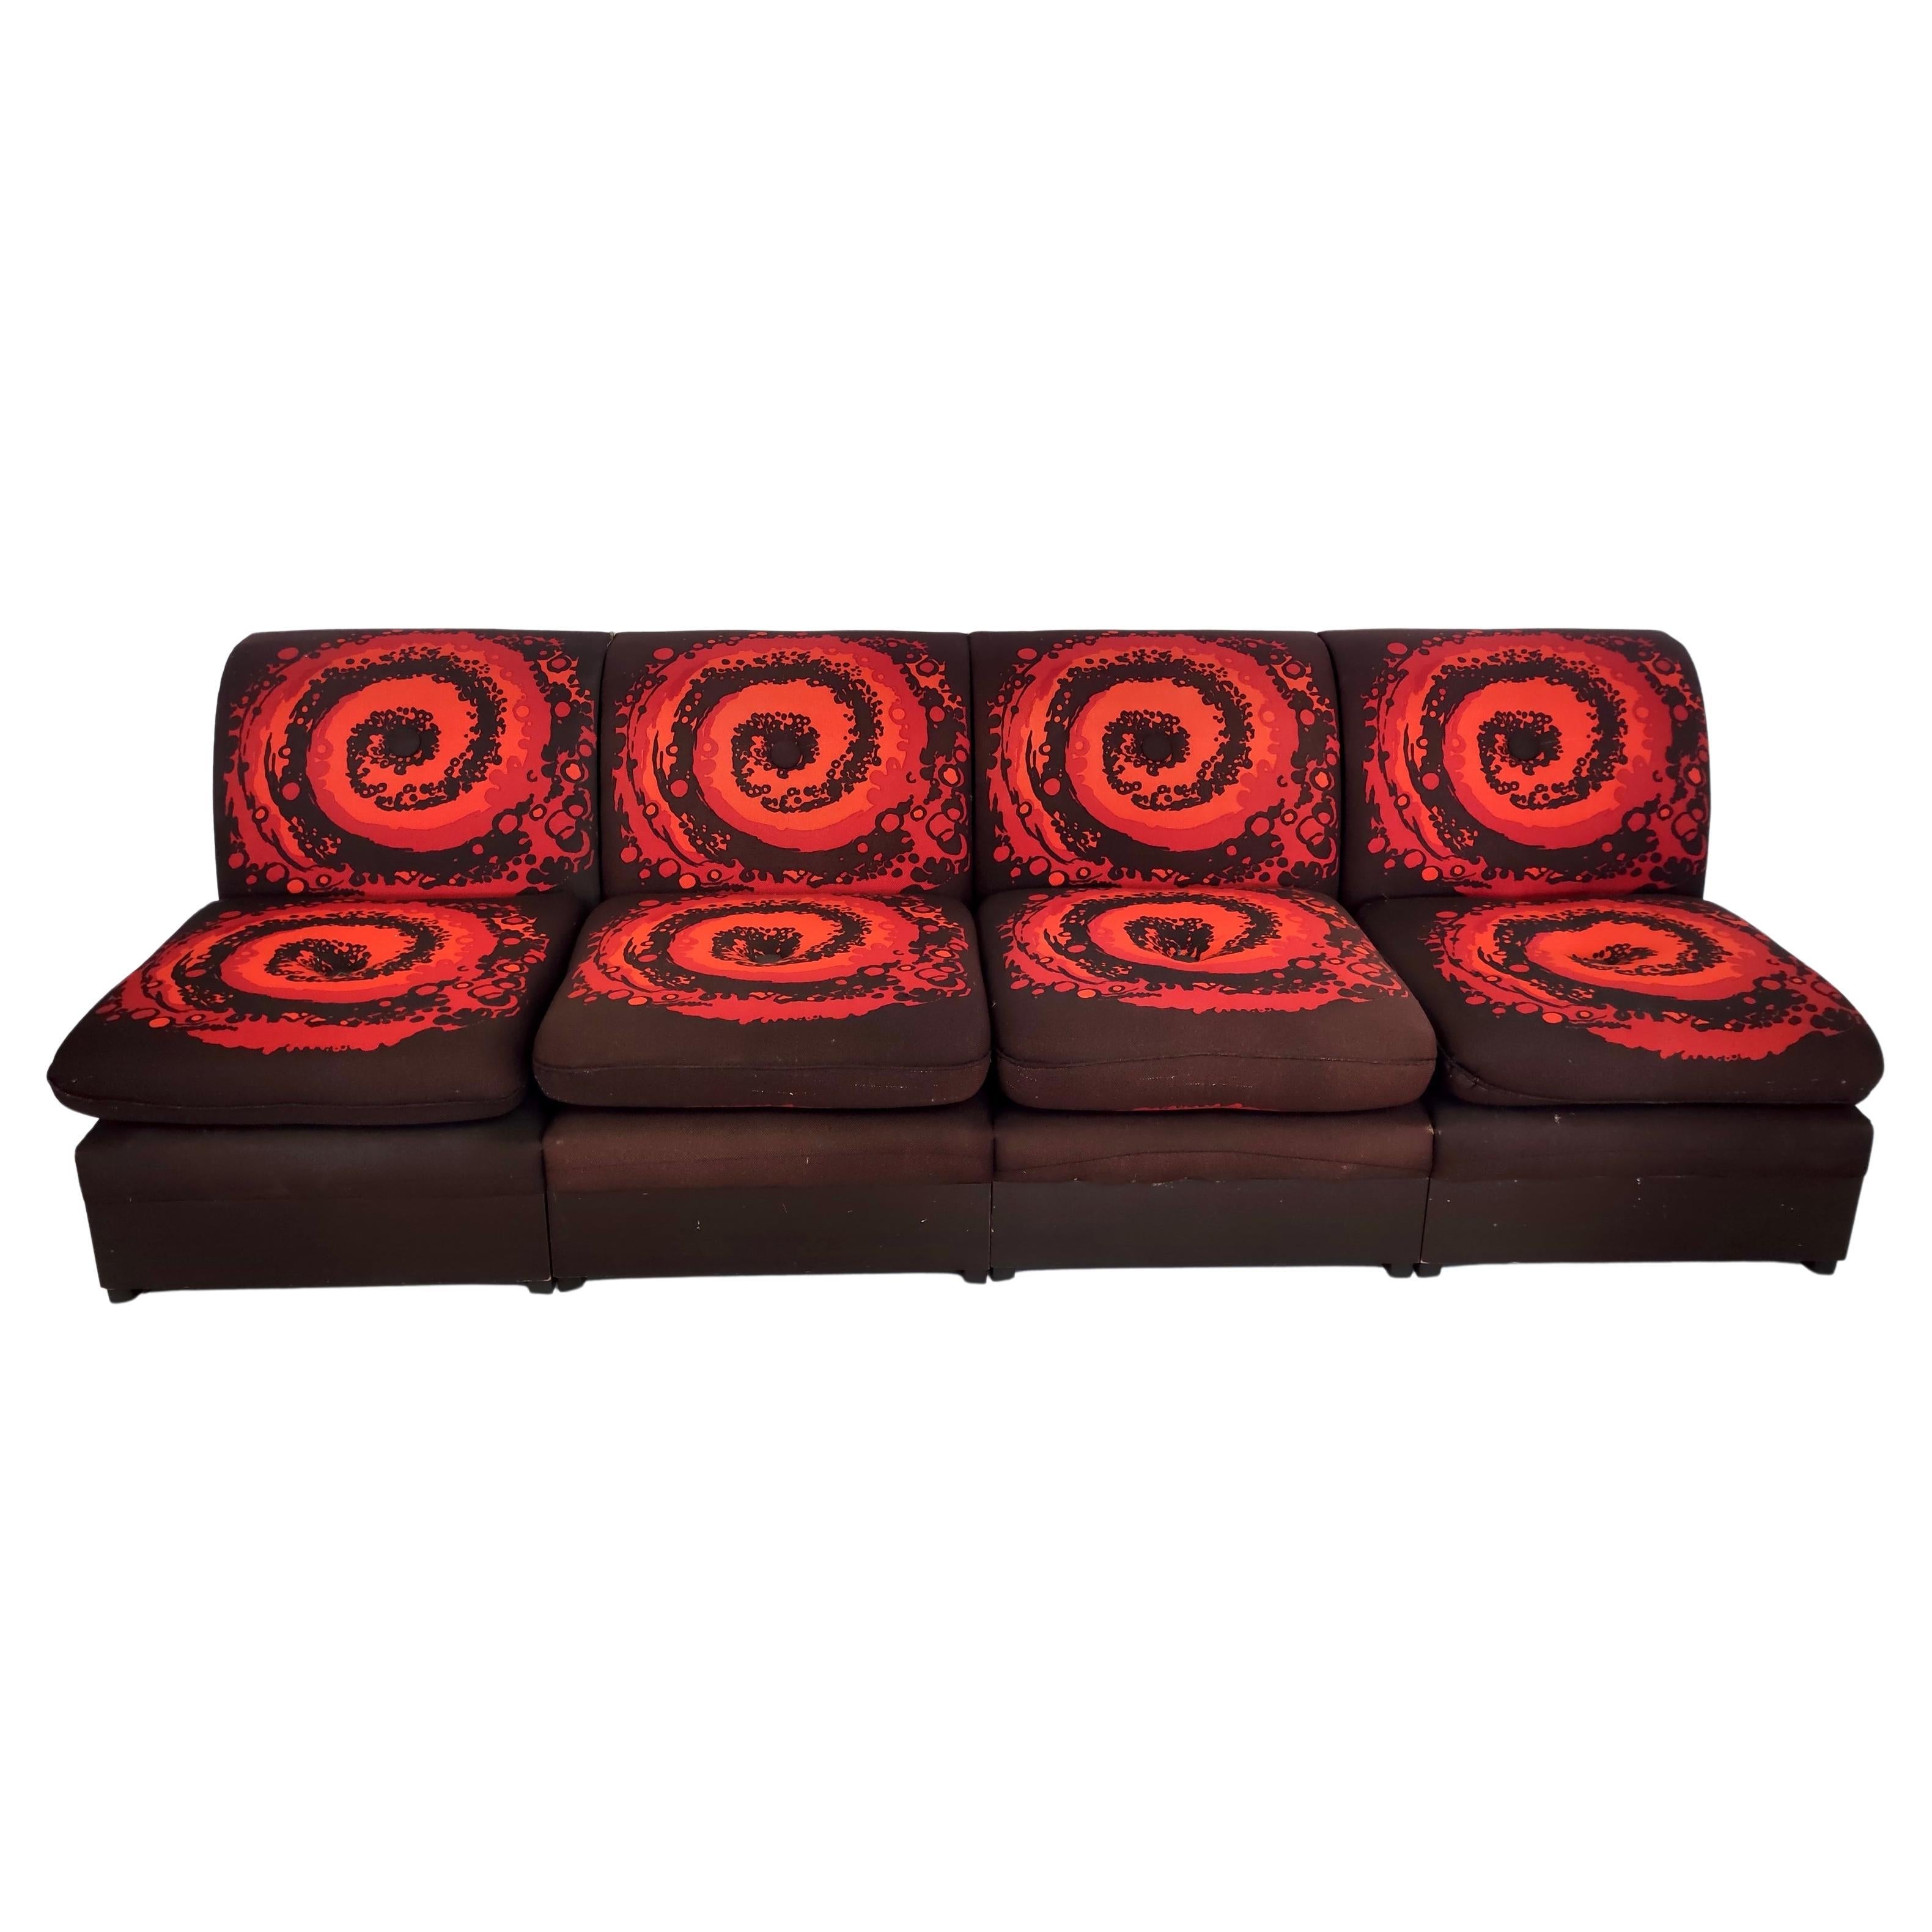 Set of Four Postmodern Brown Lounge Chairs with an Orange Red Spirals Motif For Sale